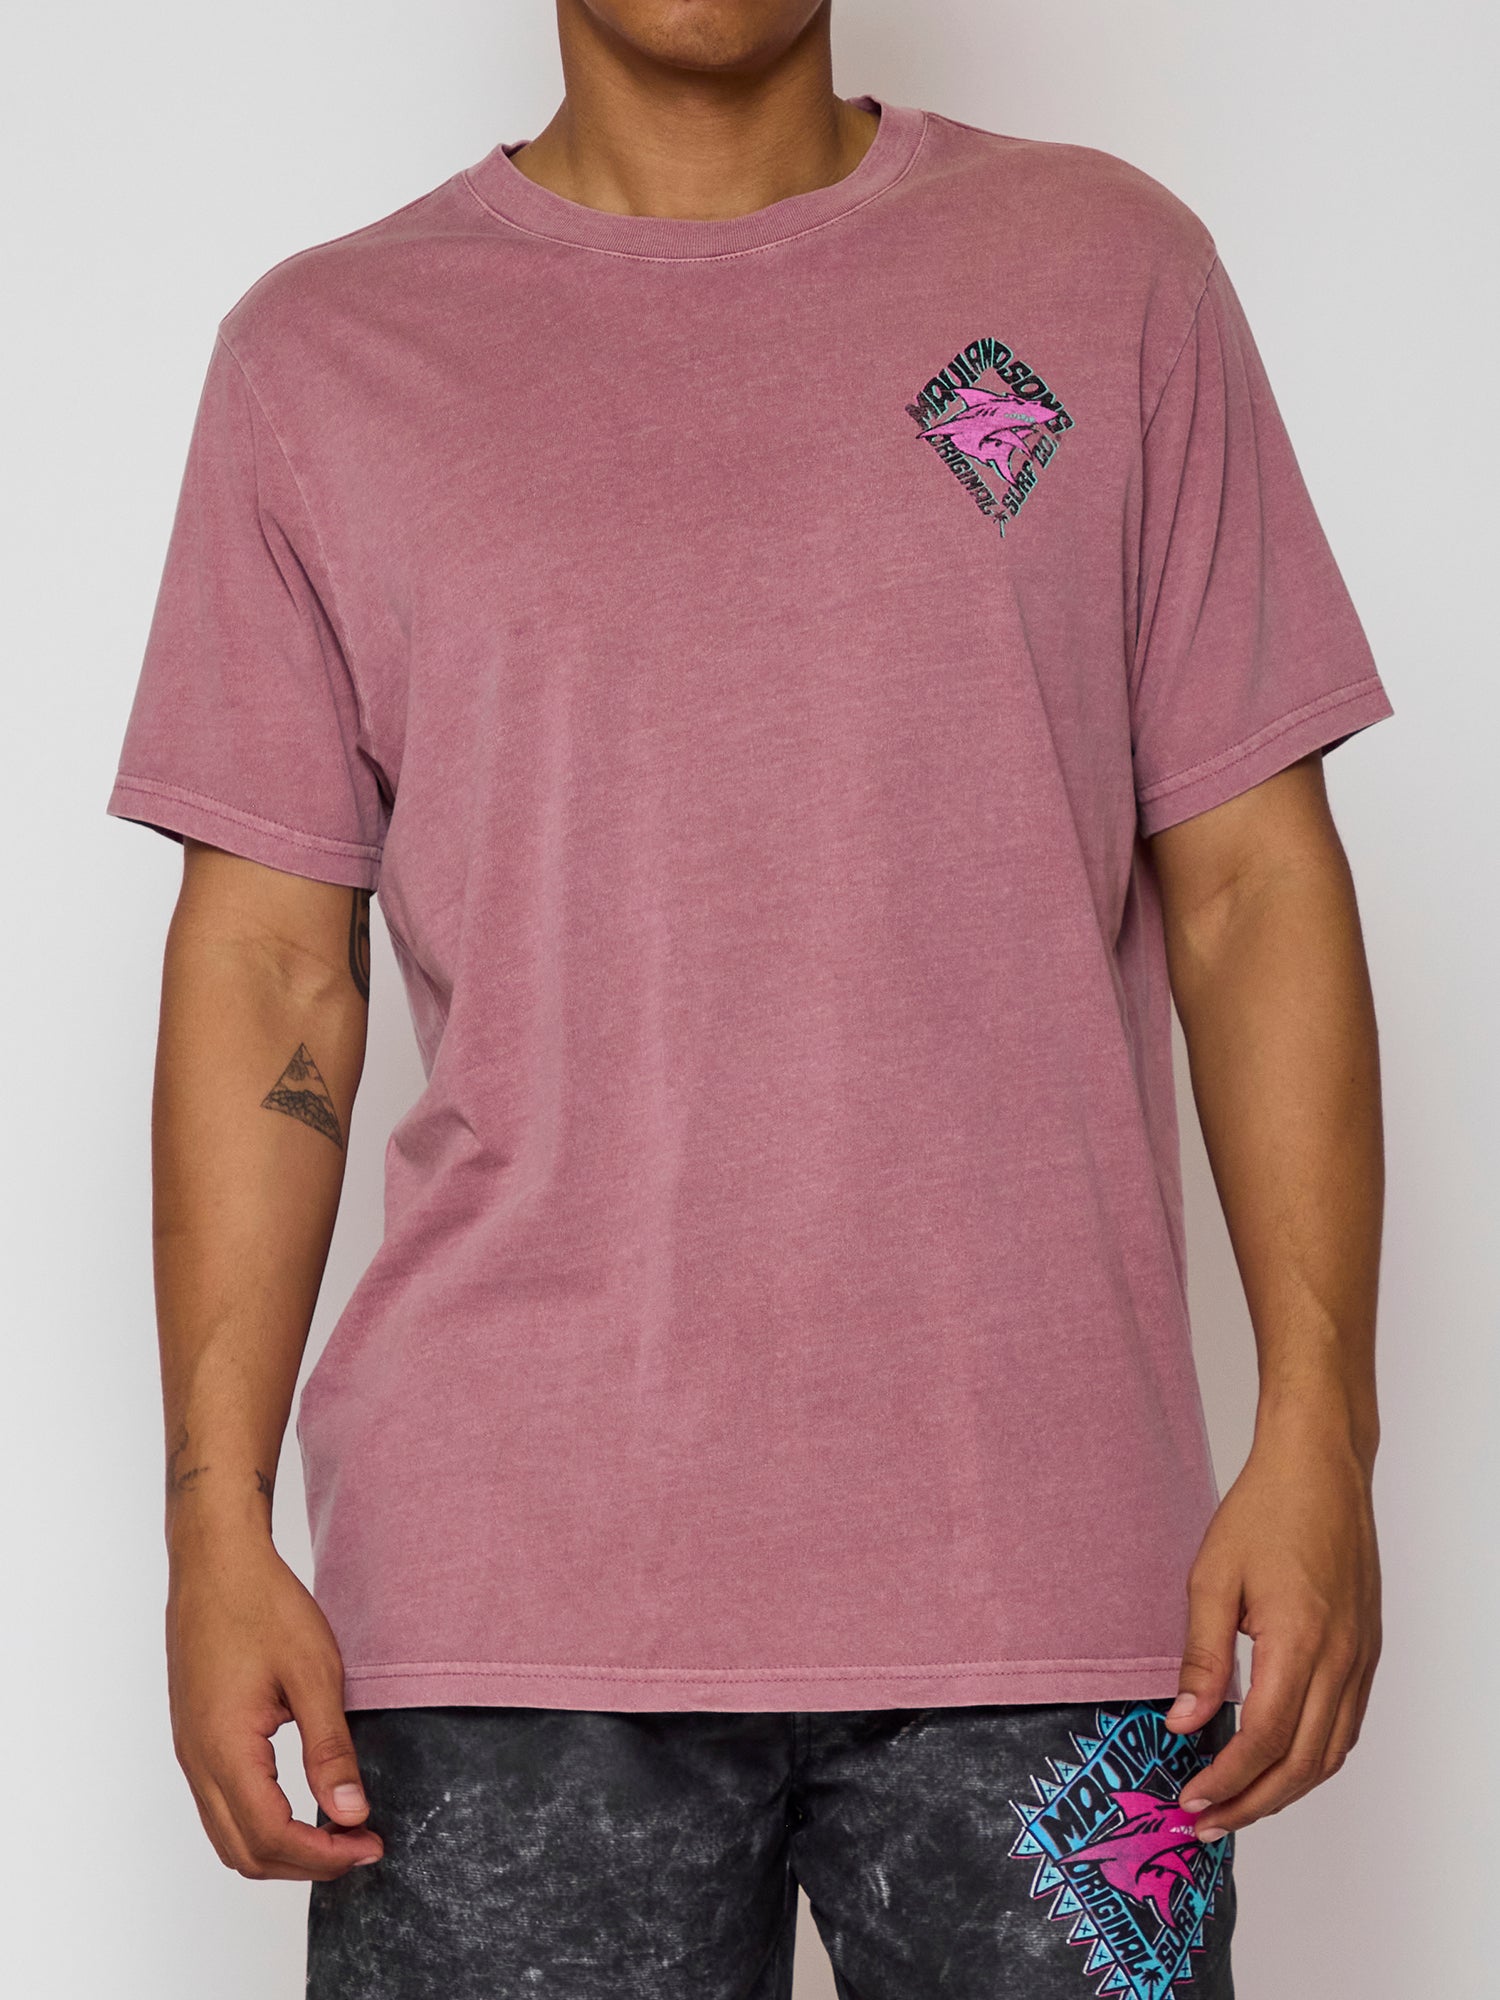 Back to Back Unisex T-Shirt in Foxglove